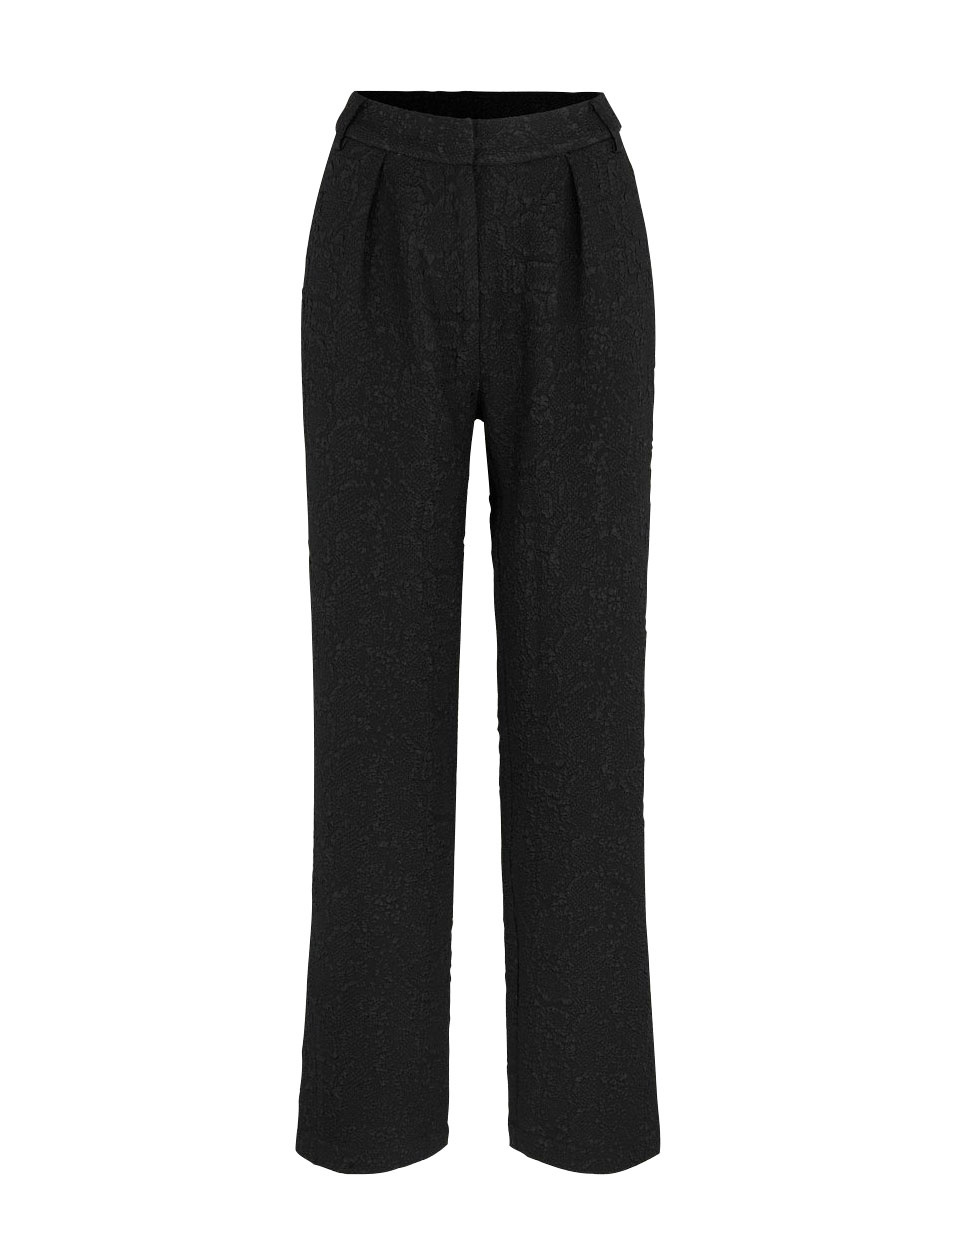 Gallery pant black | Just Female | Newstyle - NewStyle.nl